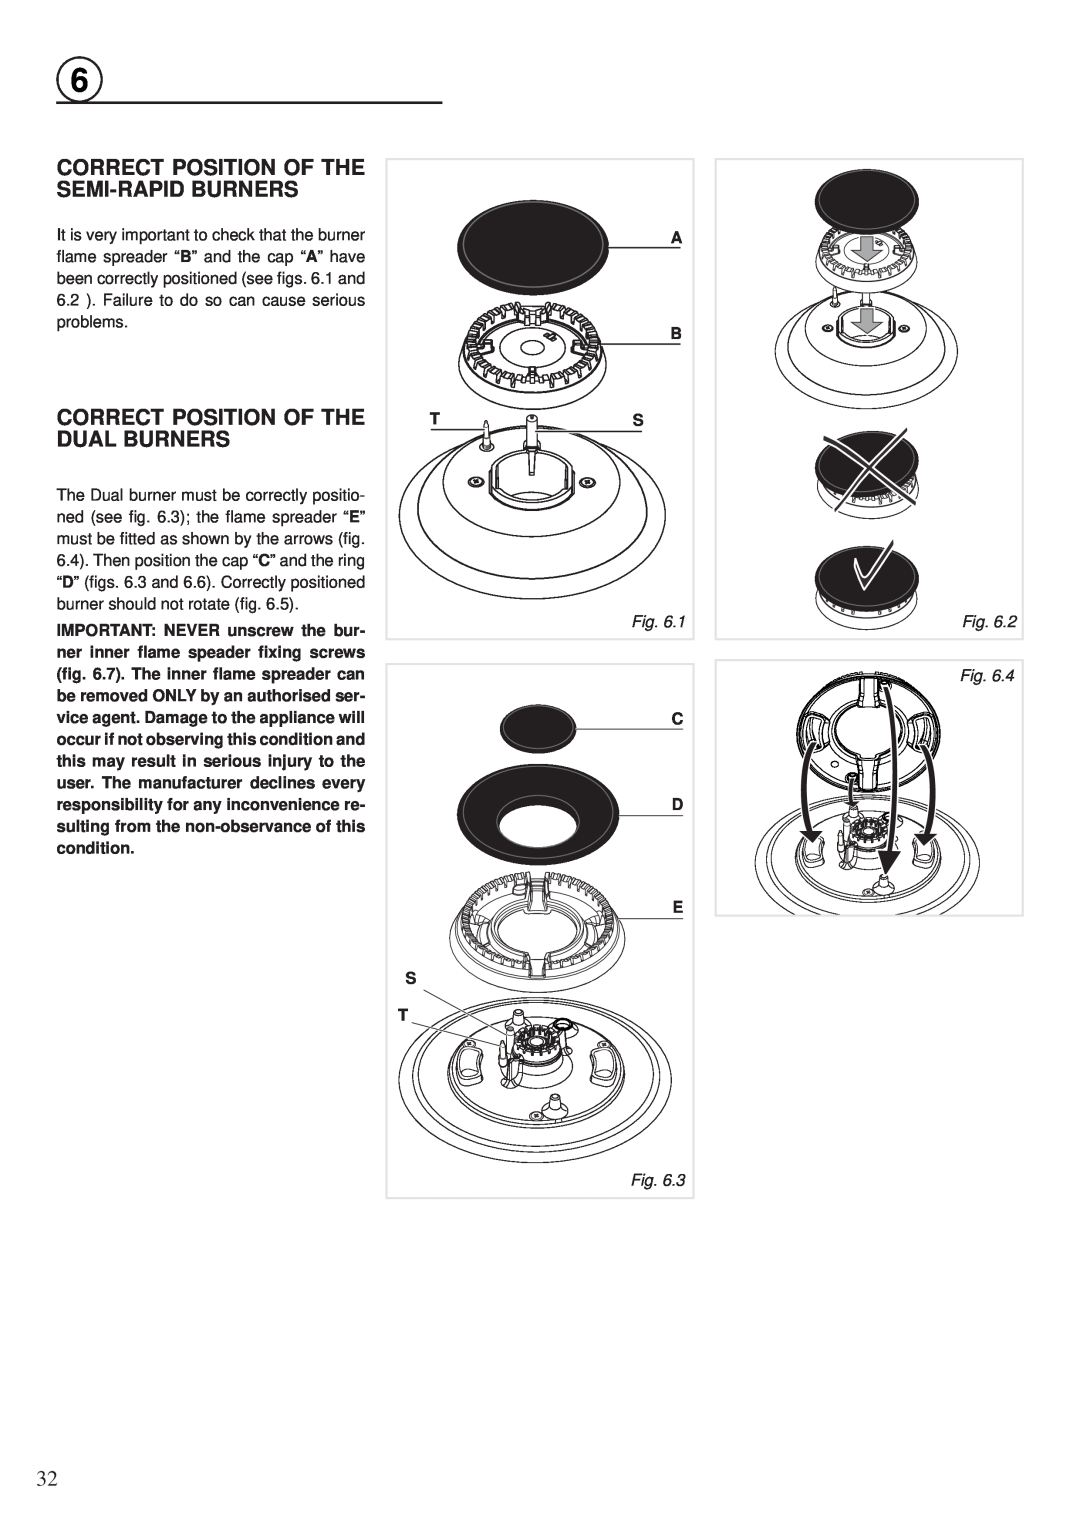 Fisher & Paykel OR30SDPWGX manual Correct Position Of The Semi-Rapid Burners, Correct Position Of The Dual Burners 